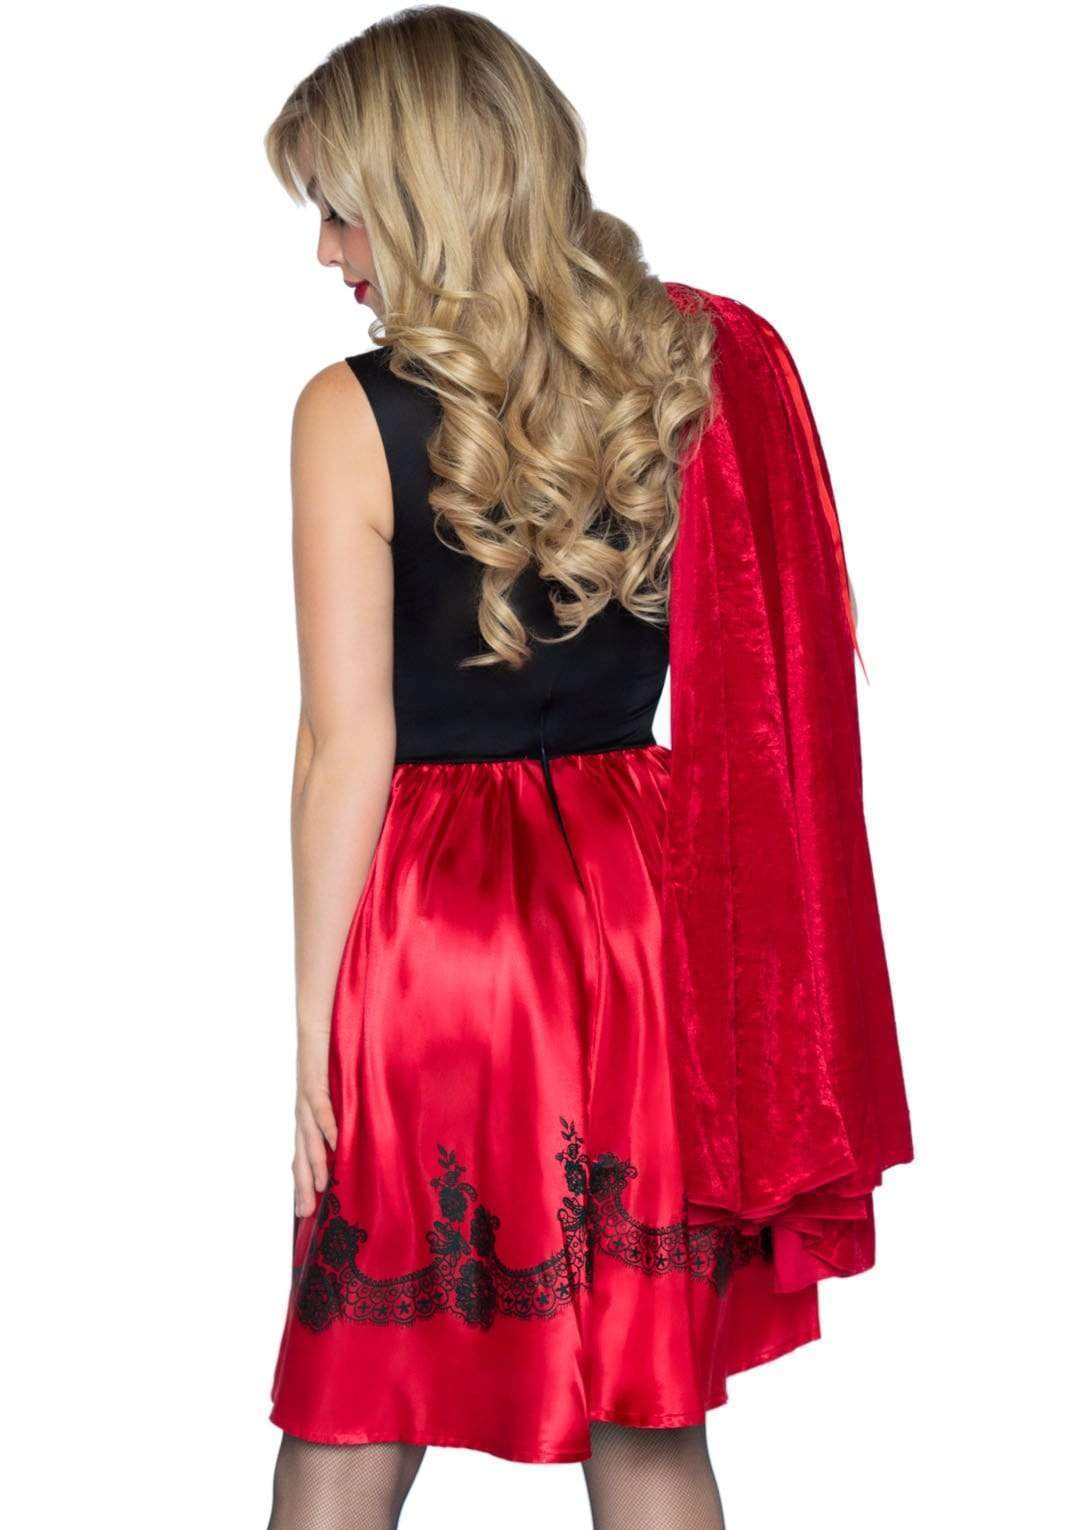 Classic Red Riding Hood Costume